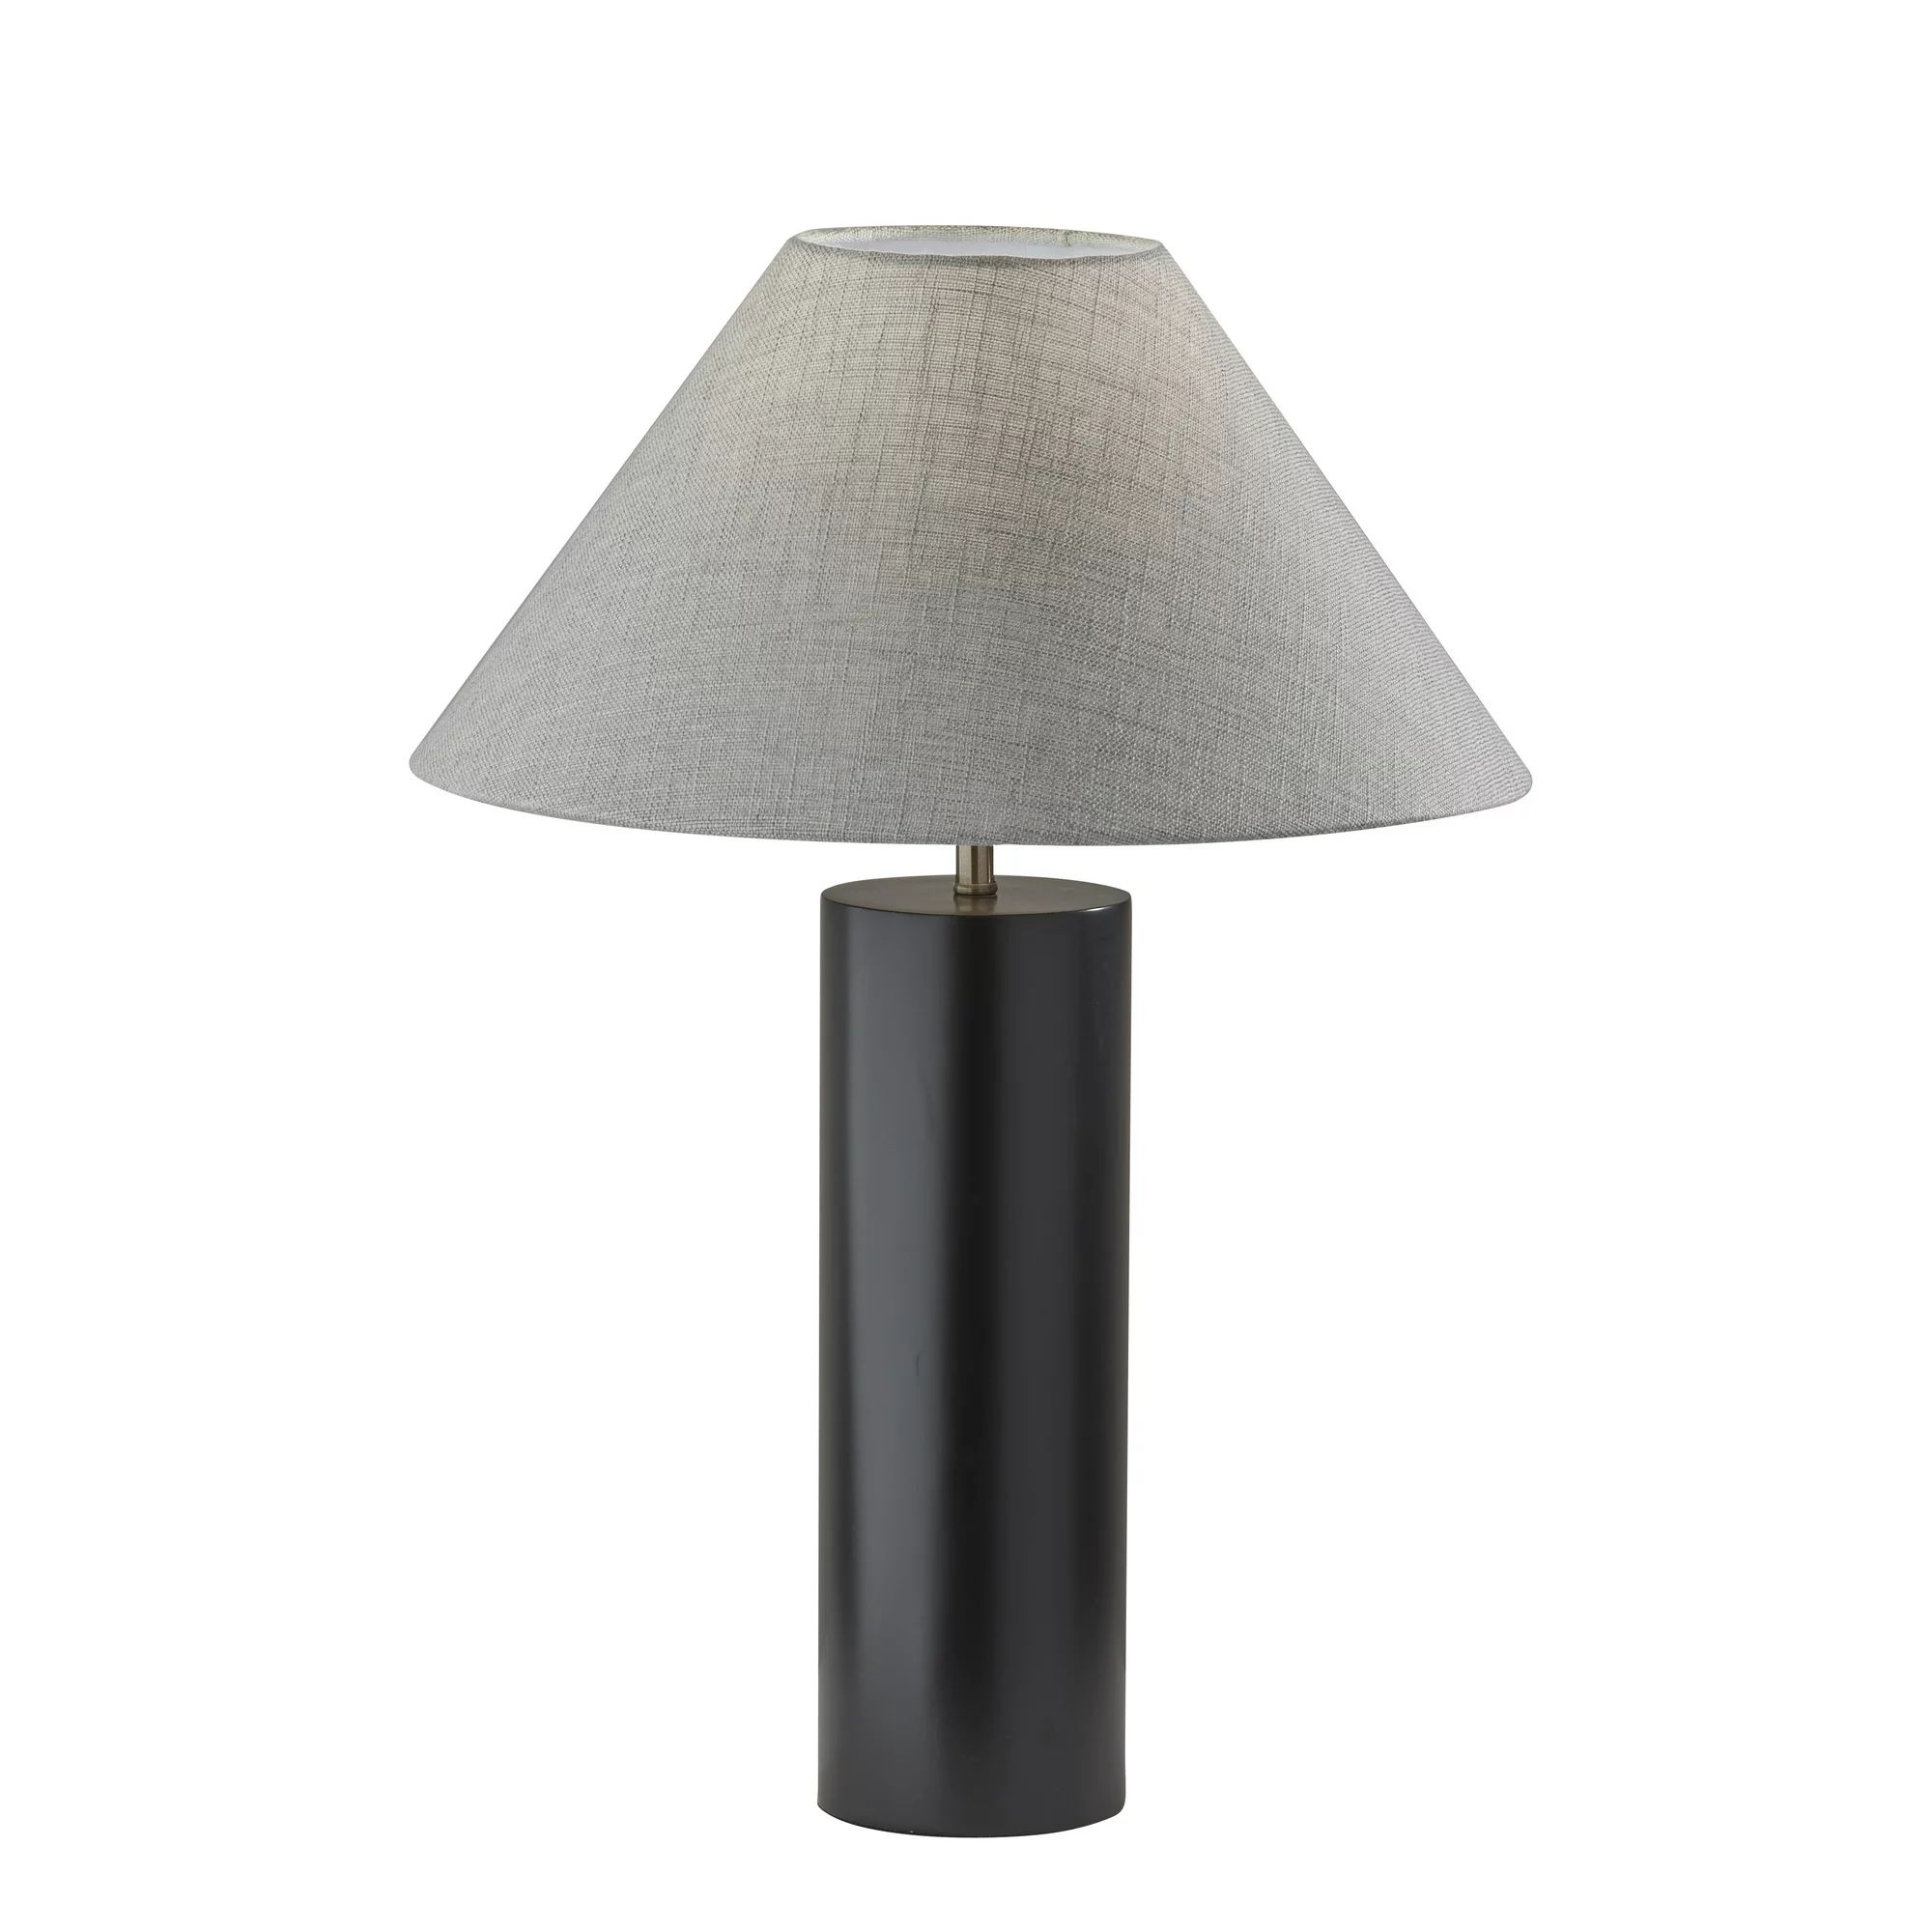 Adesso Martin Table Lamp, Black Poplar Wood with Antique Brass Accent | Walmart (US)